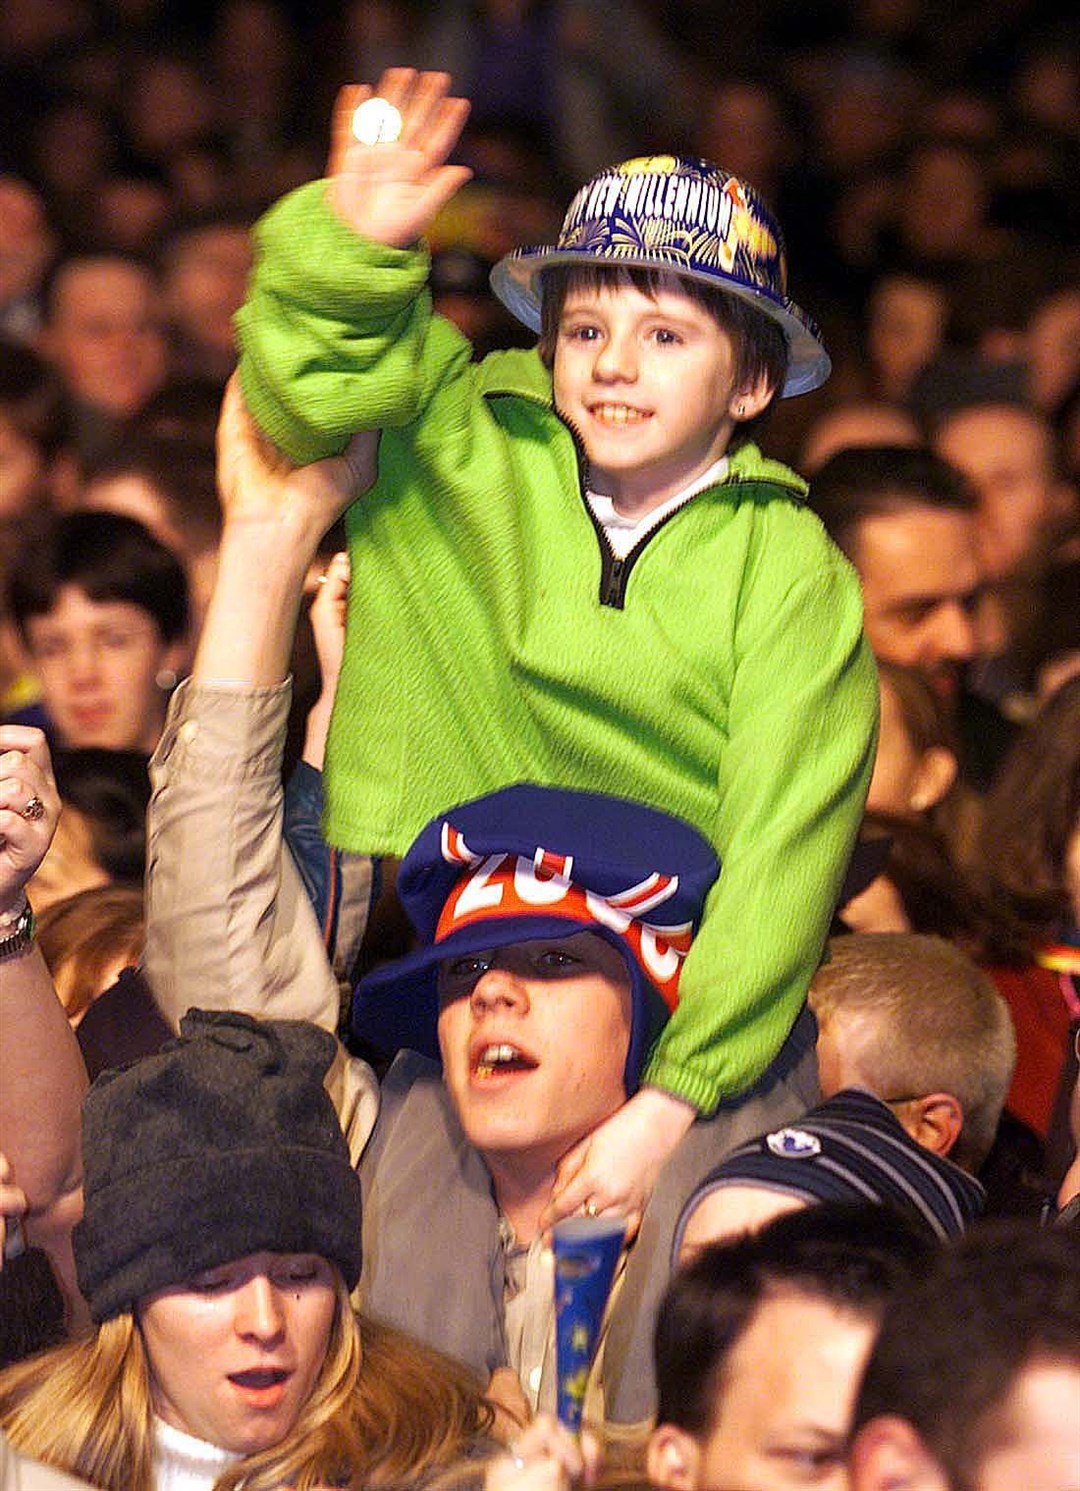 A young boy in the crowd outside Belfast City Hall amid celebrations to mark the new millennium (Paul Faith/PA)